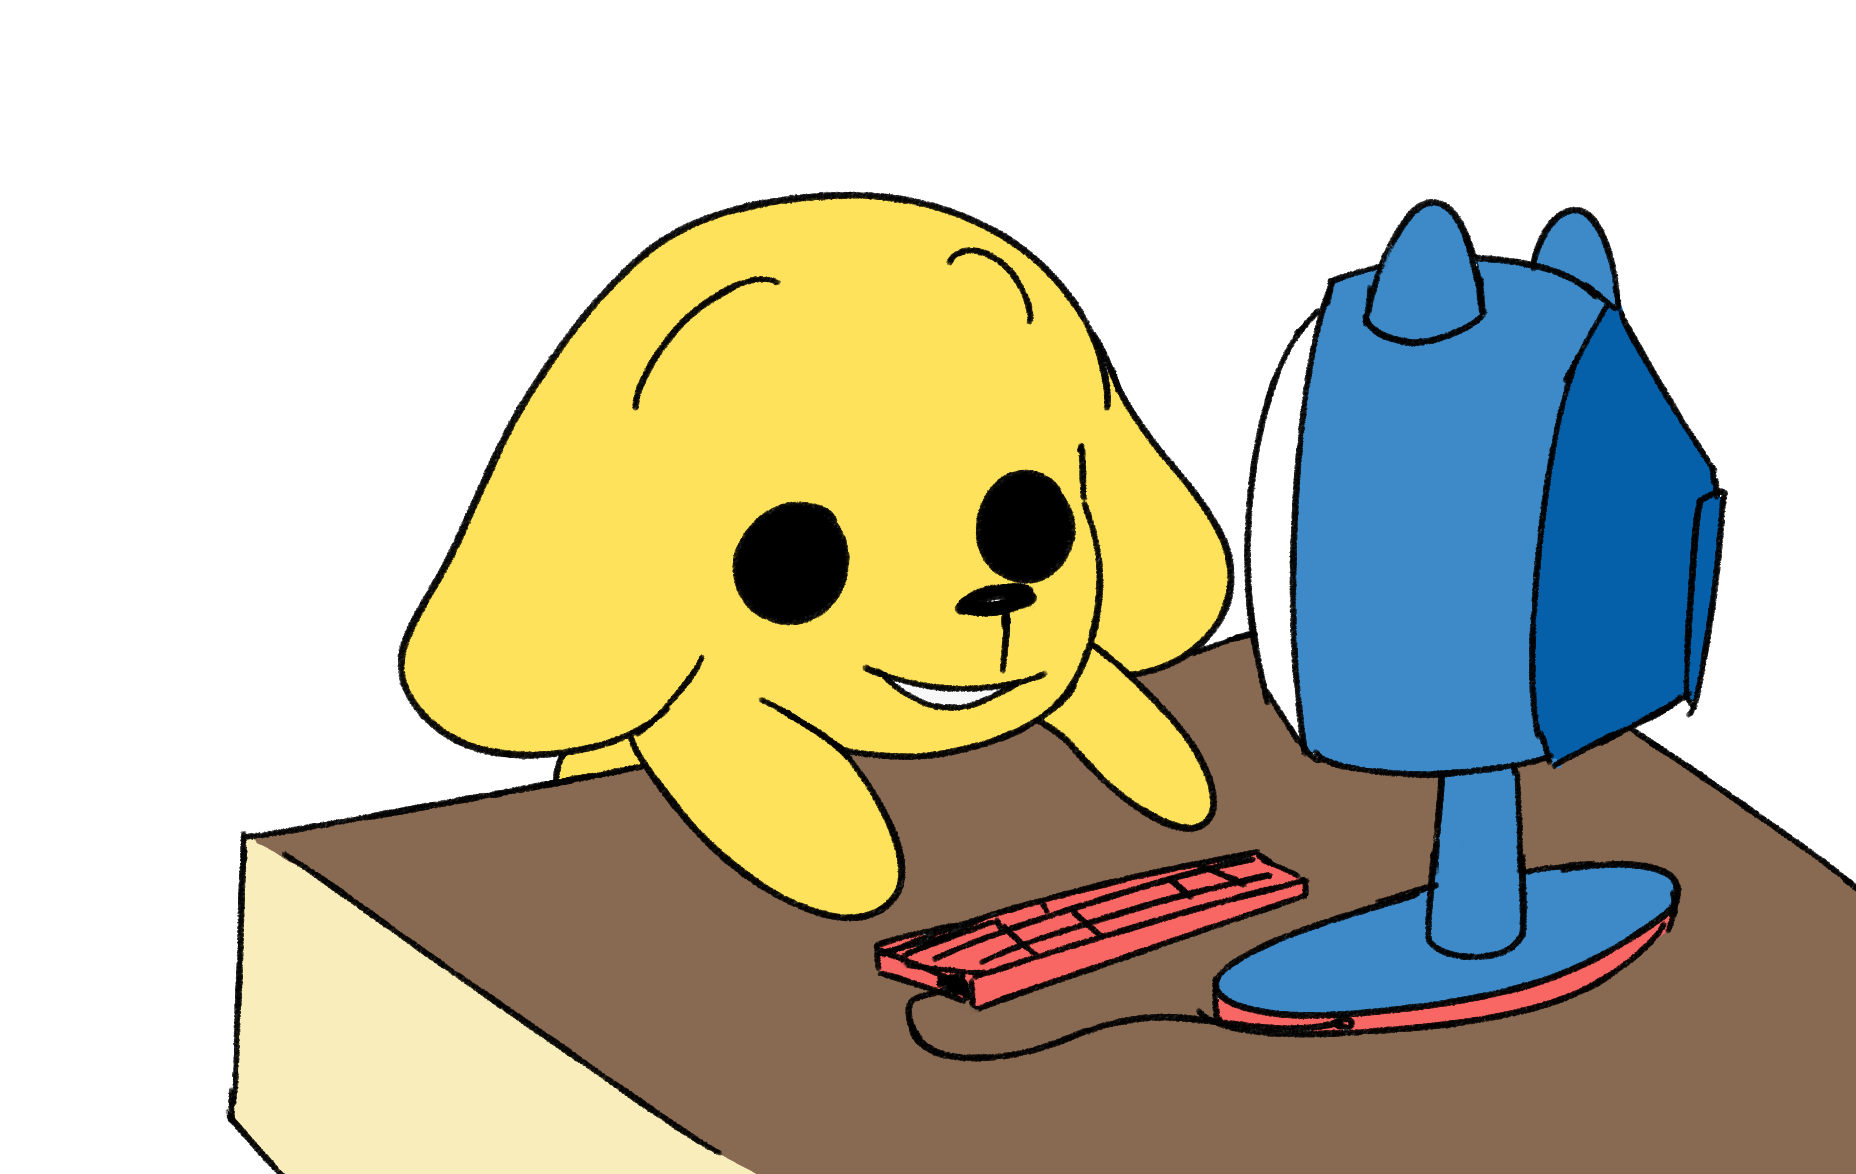 pochitchi sitting at a desk in-front of a tamagotchi-styled computer.